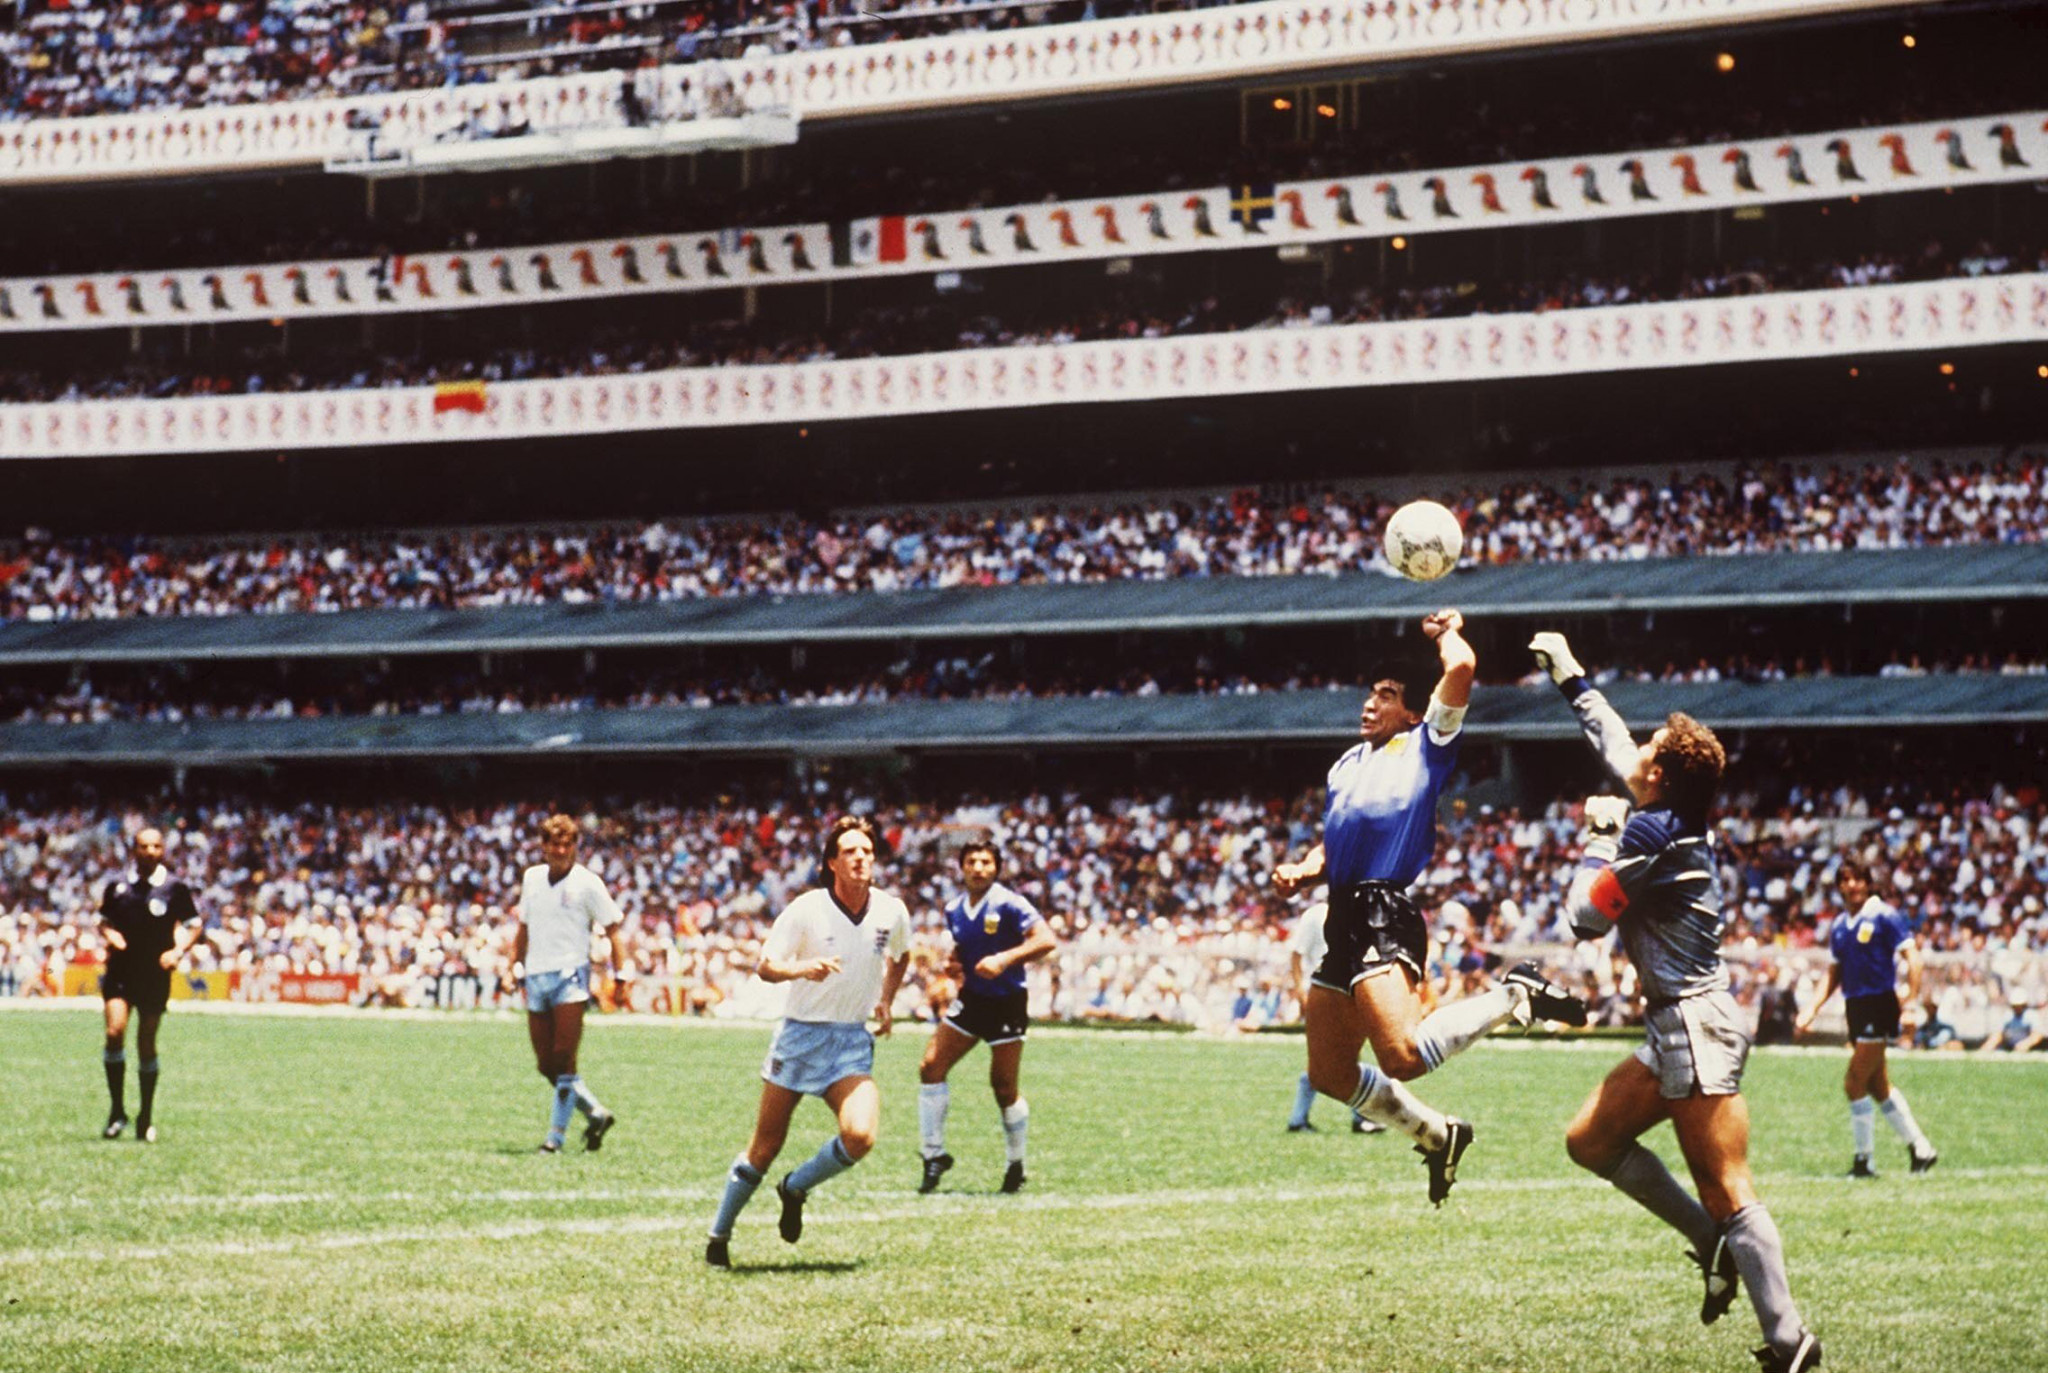 Diego Maradona's brace versus England mixed sublime skill with a win-at-all-costs approach ©Getty Images